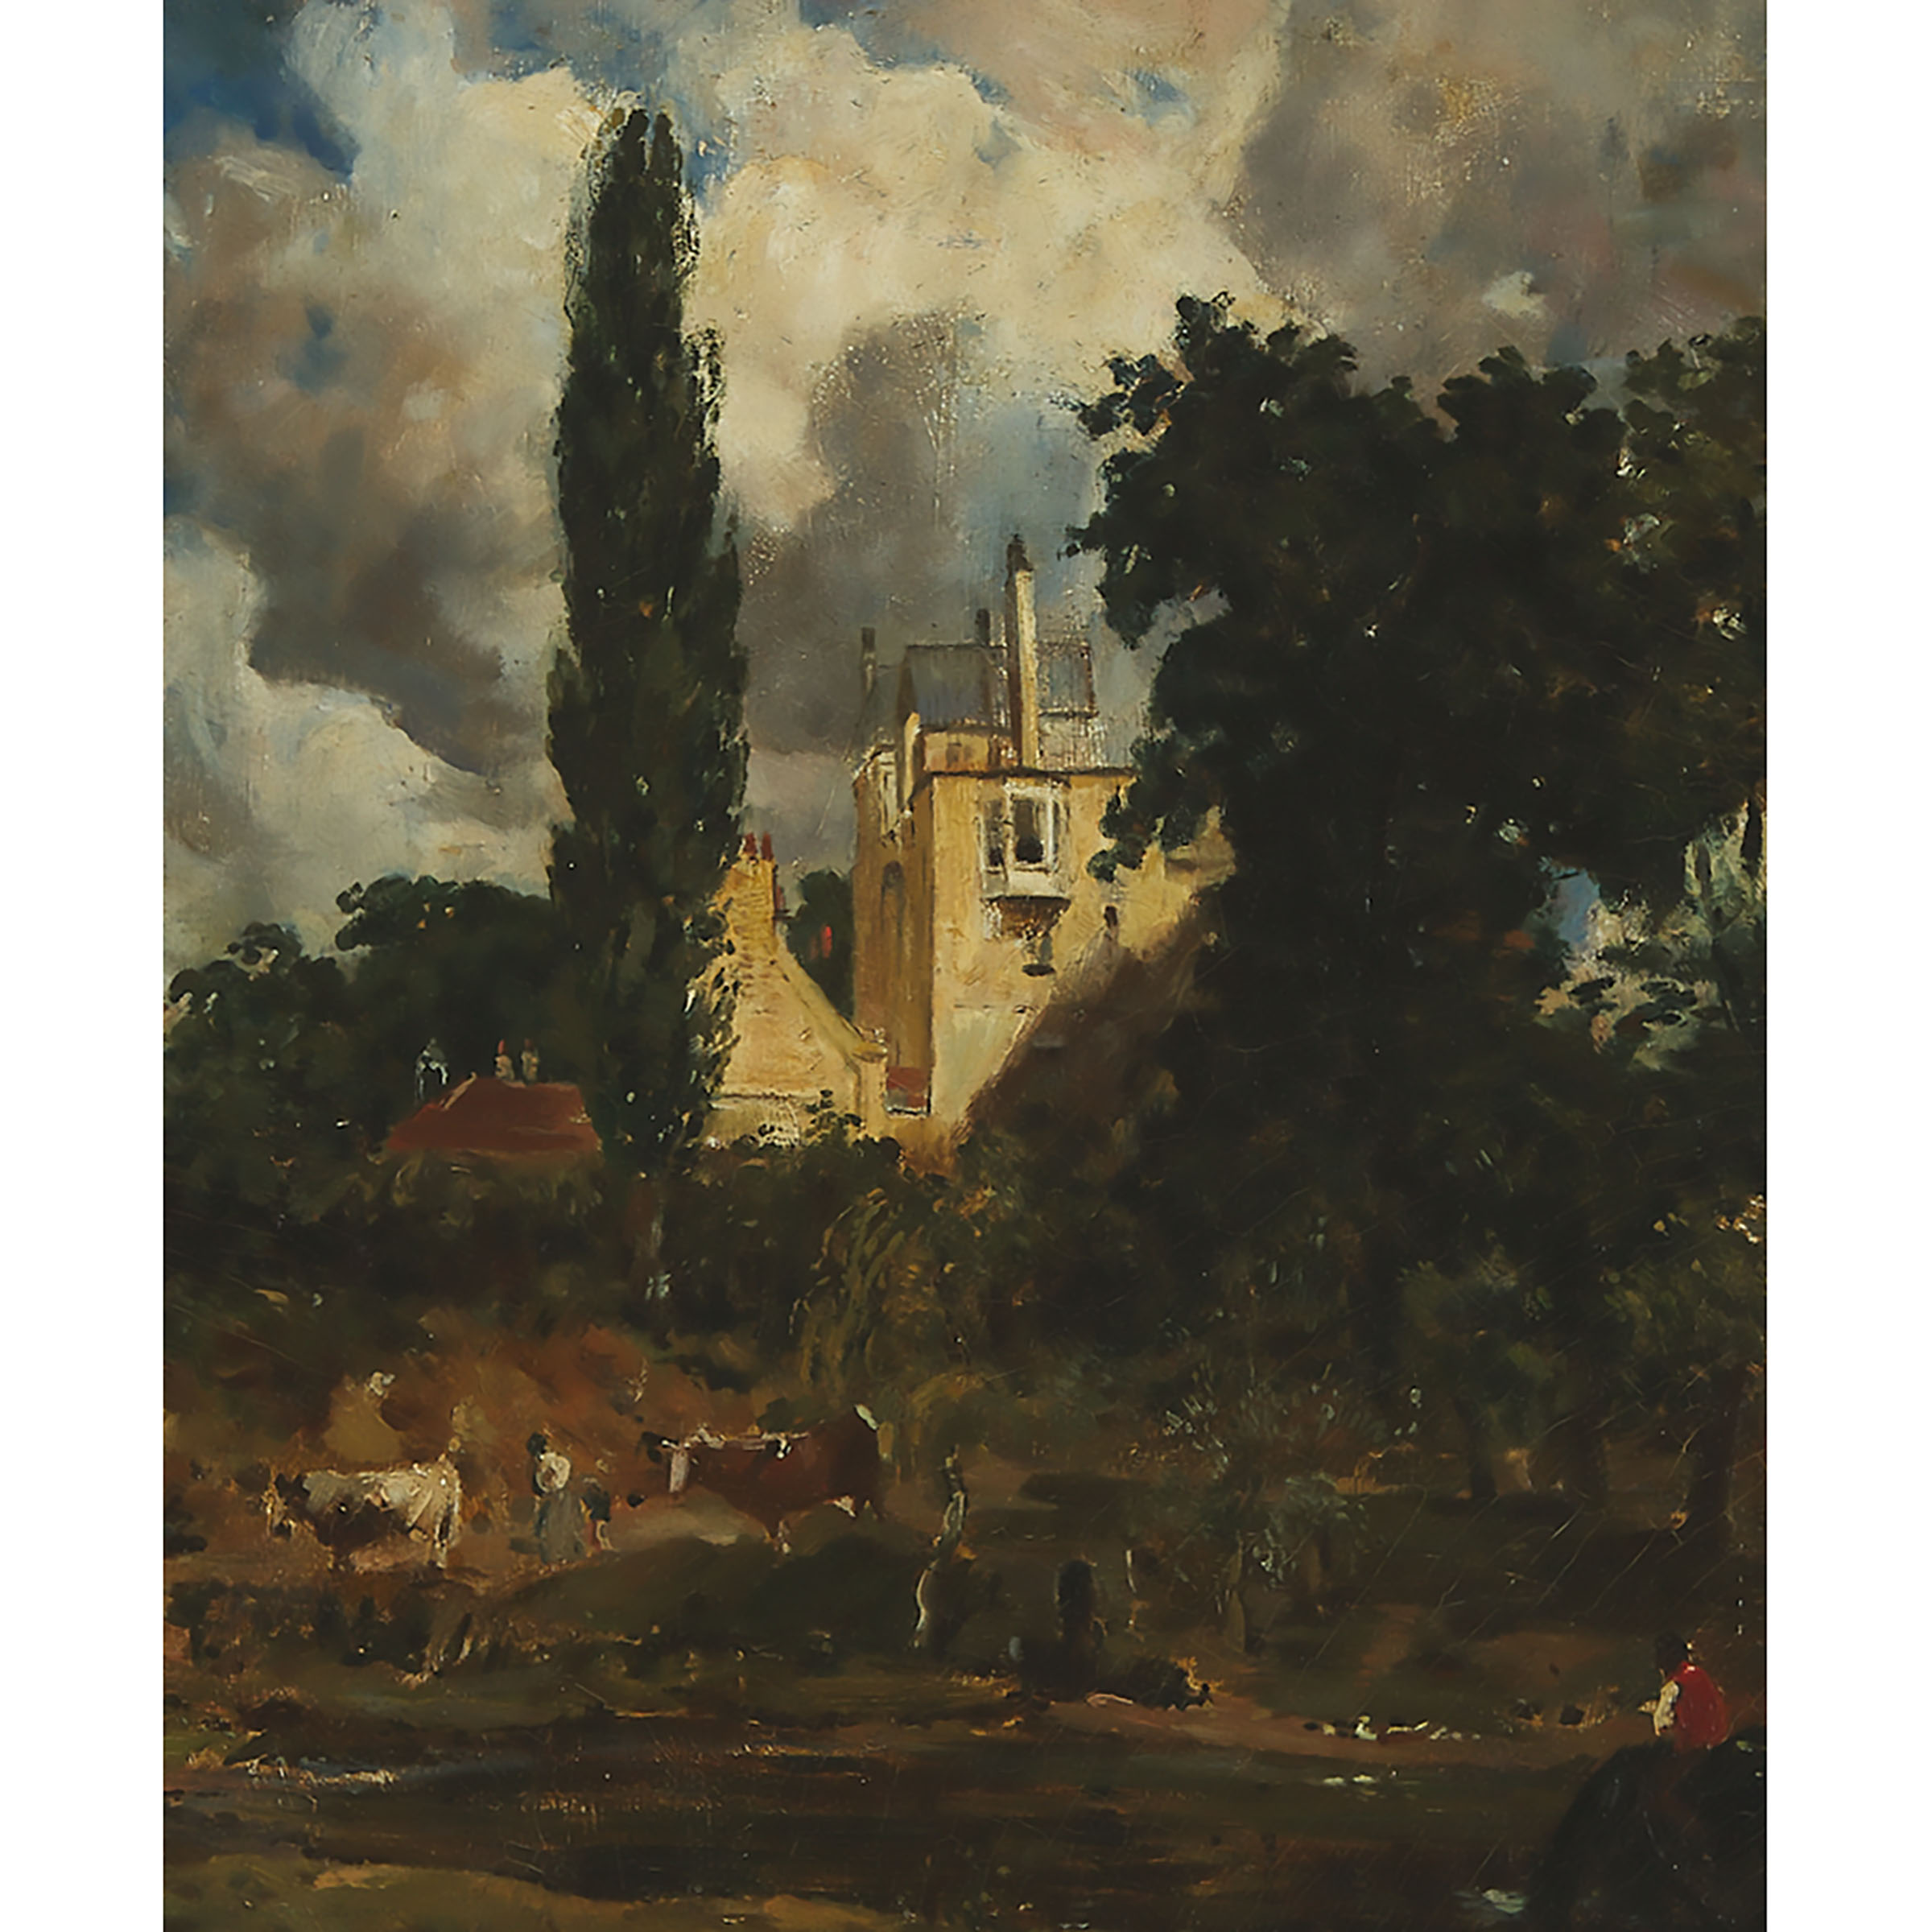 After John Constable (1776-1837)